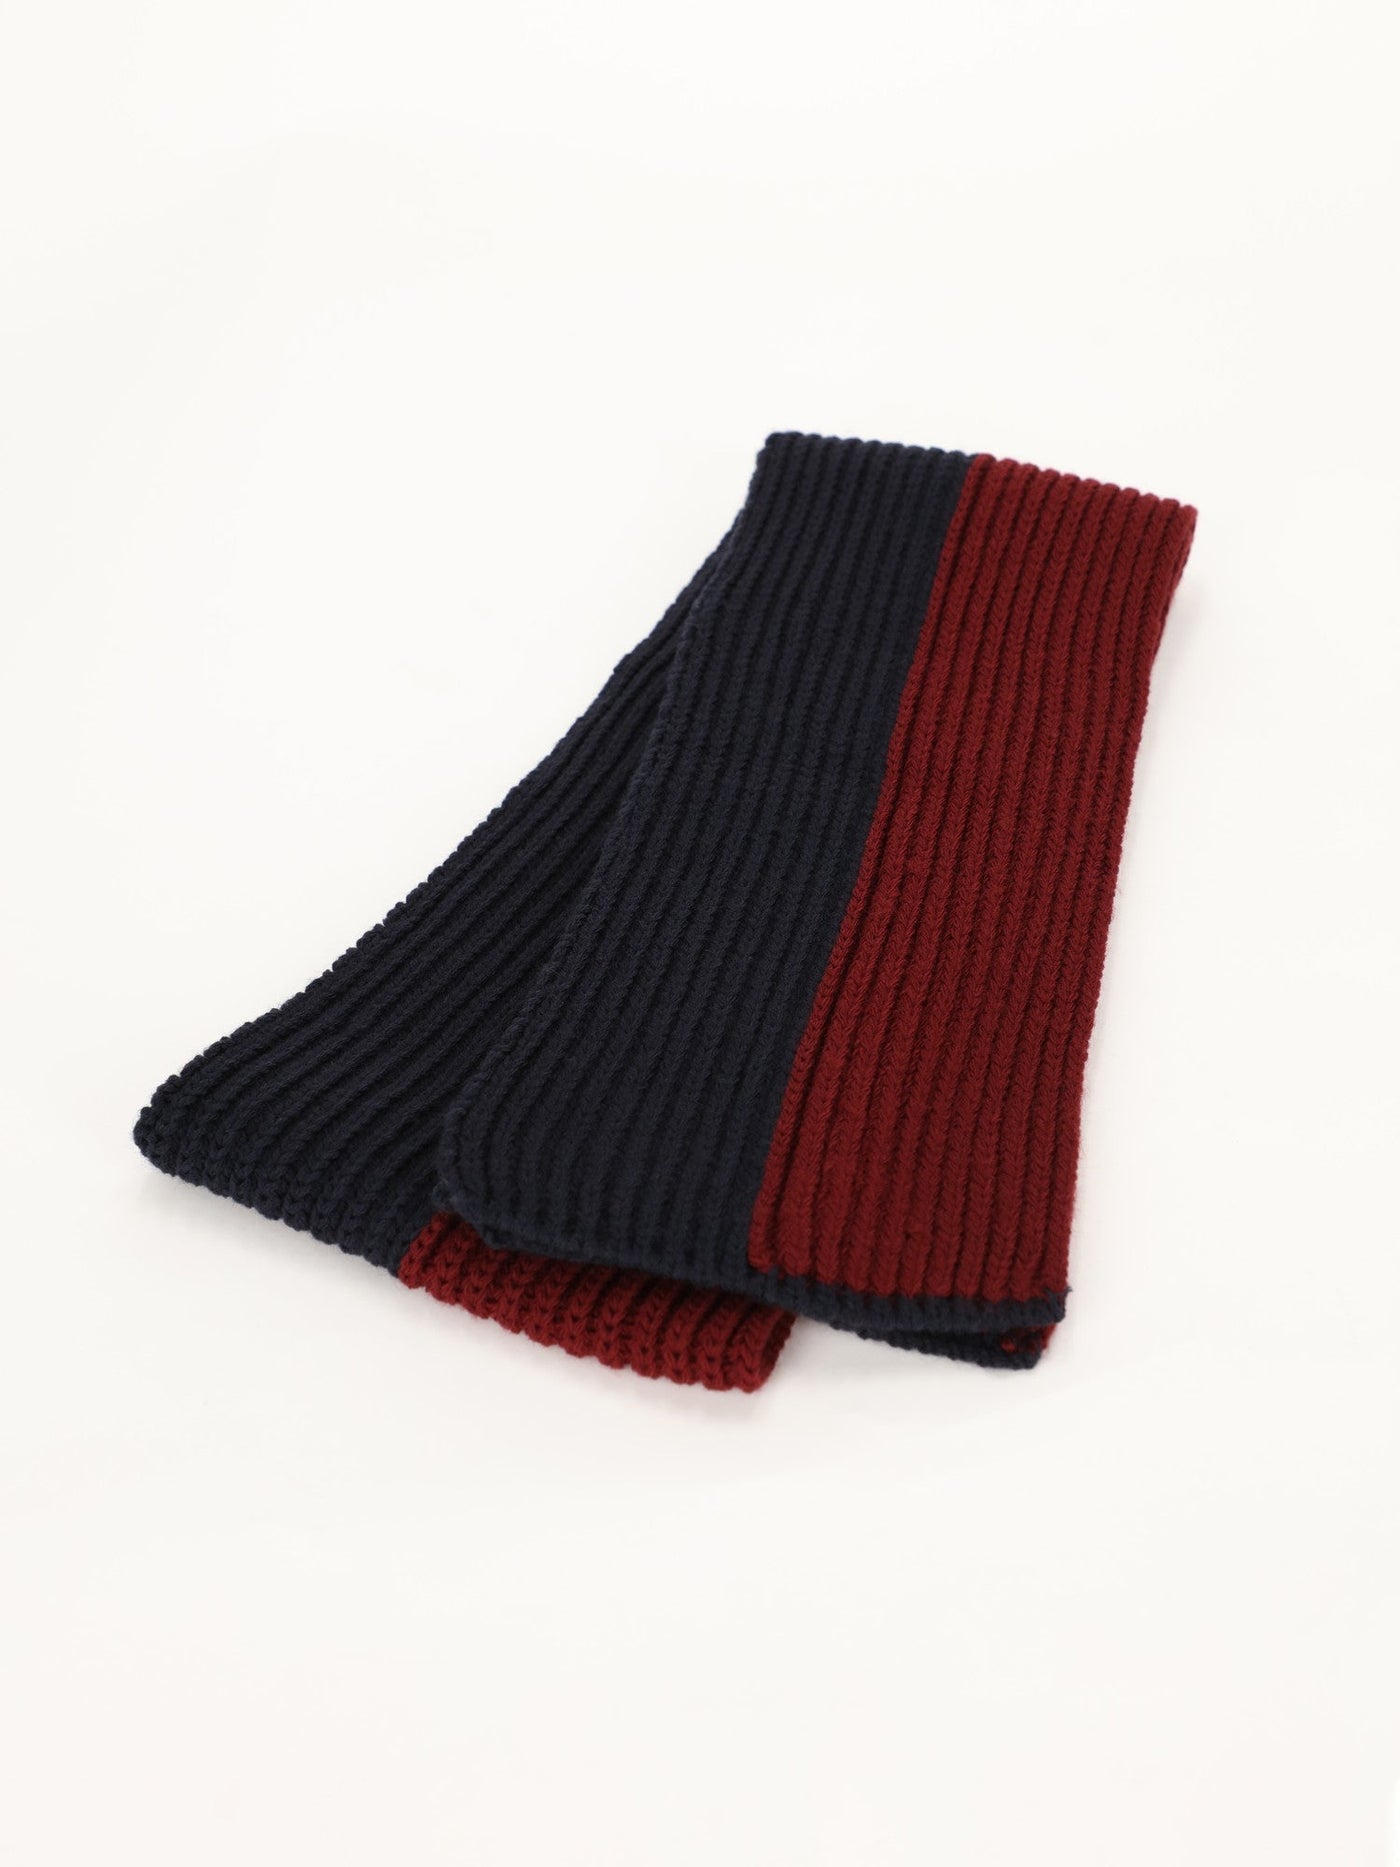 Bicolor Knitted Tricot Scarf